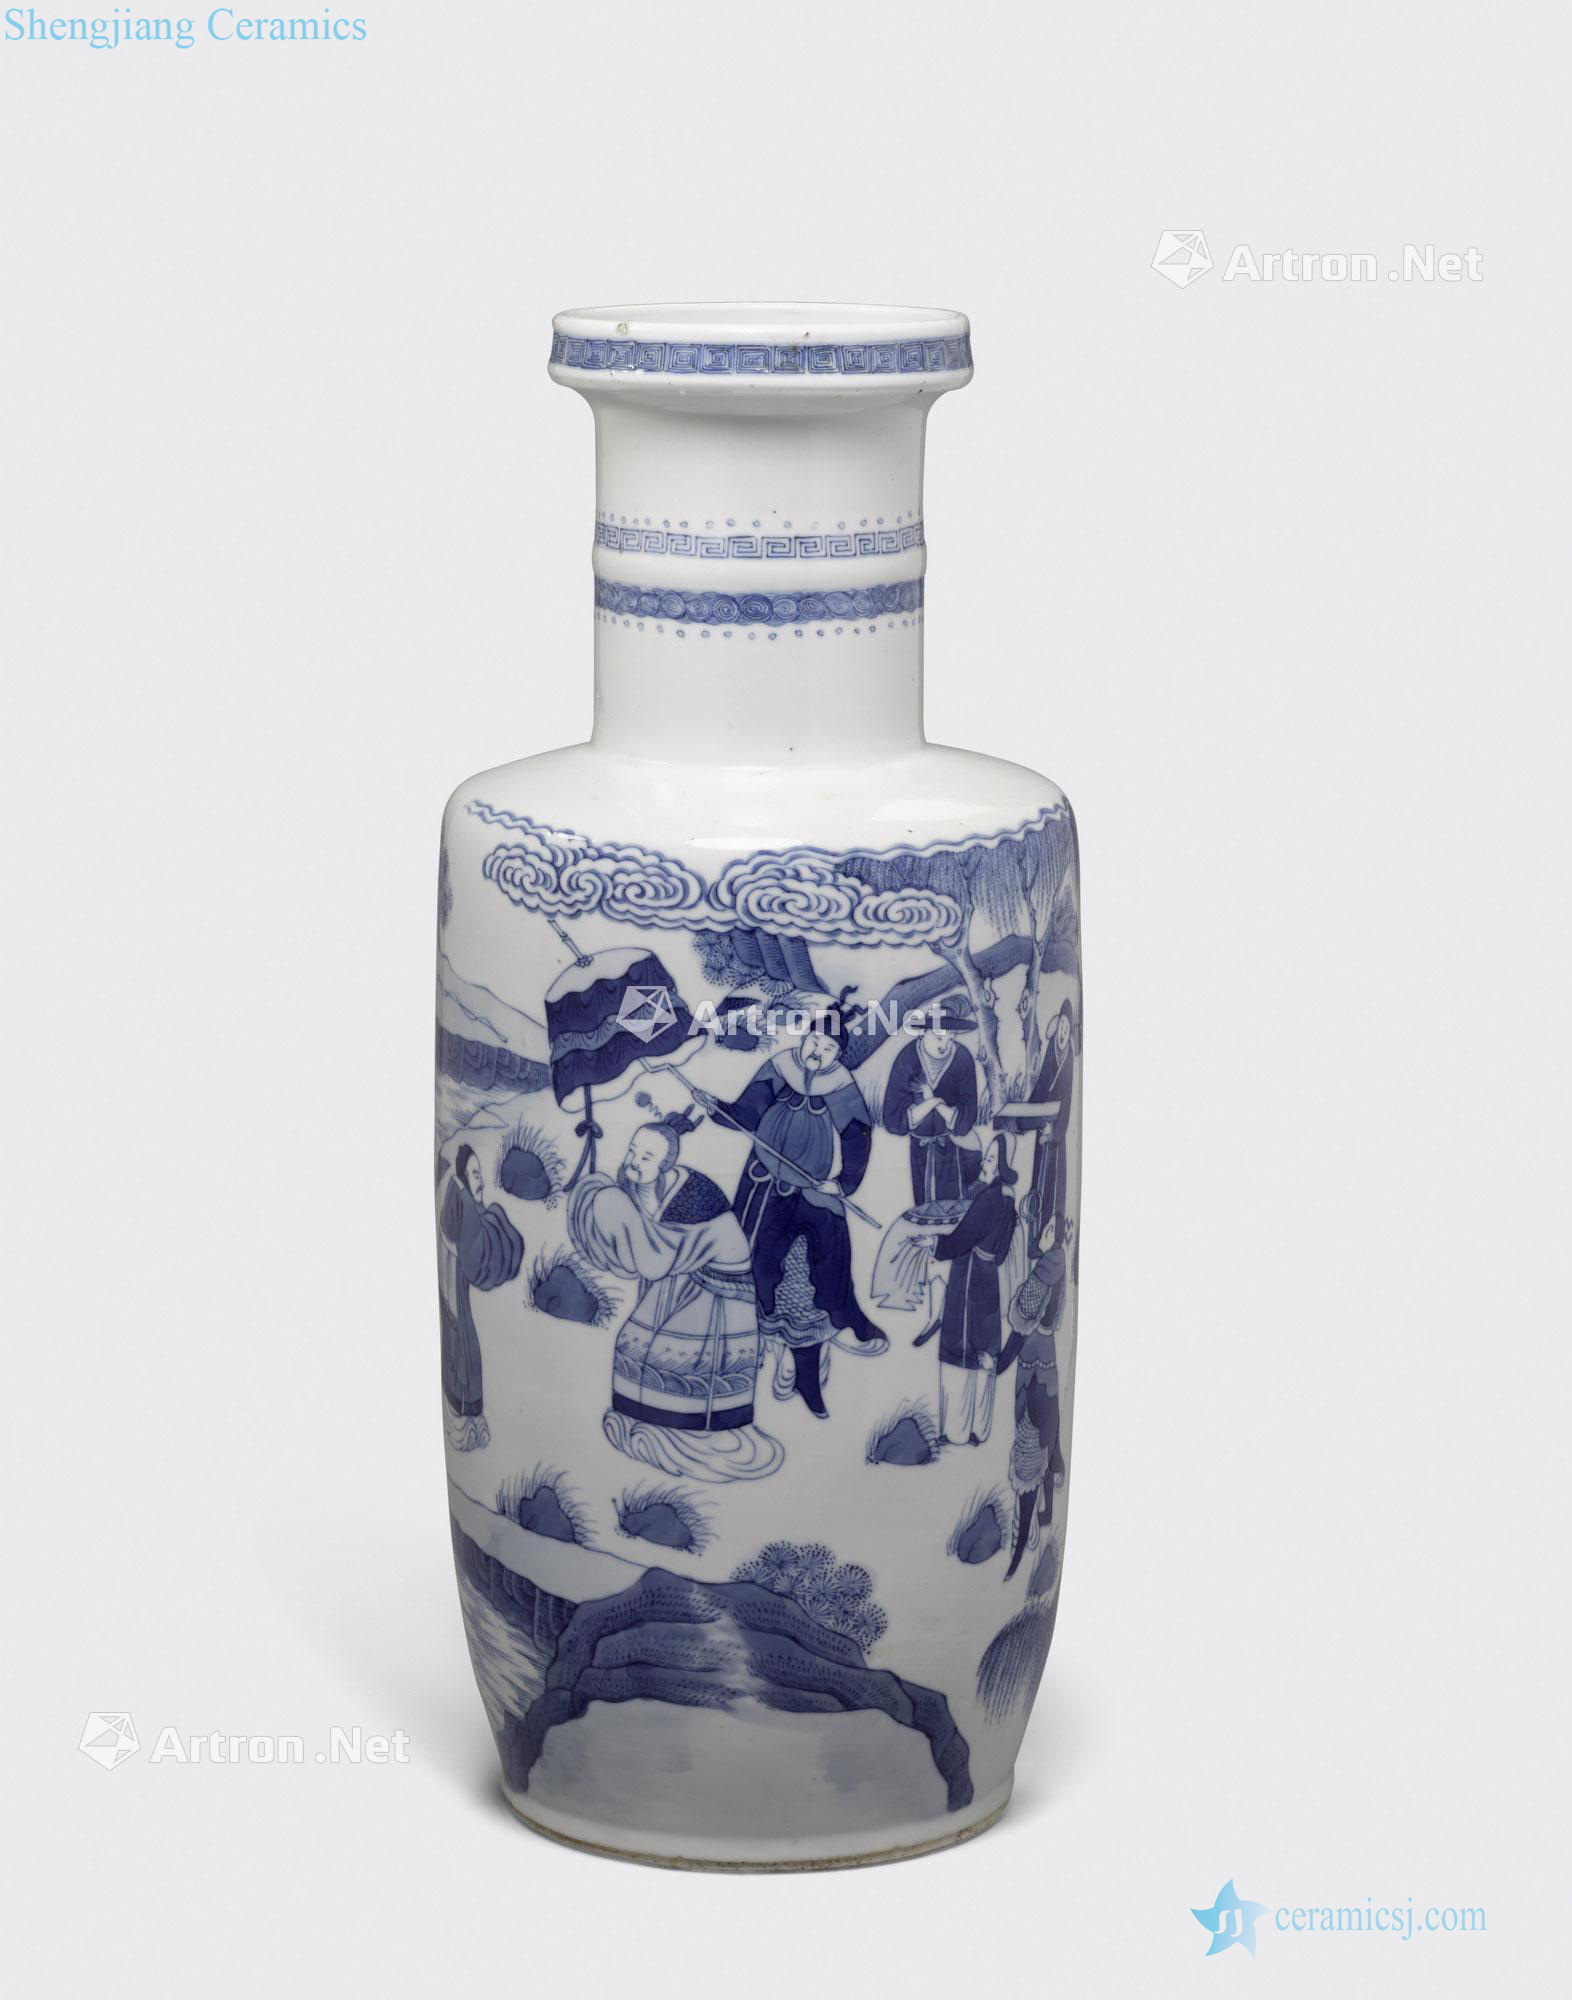 Newest the Qing/Republic period A BLUE AND WHITE ROULEAU VASE